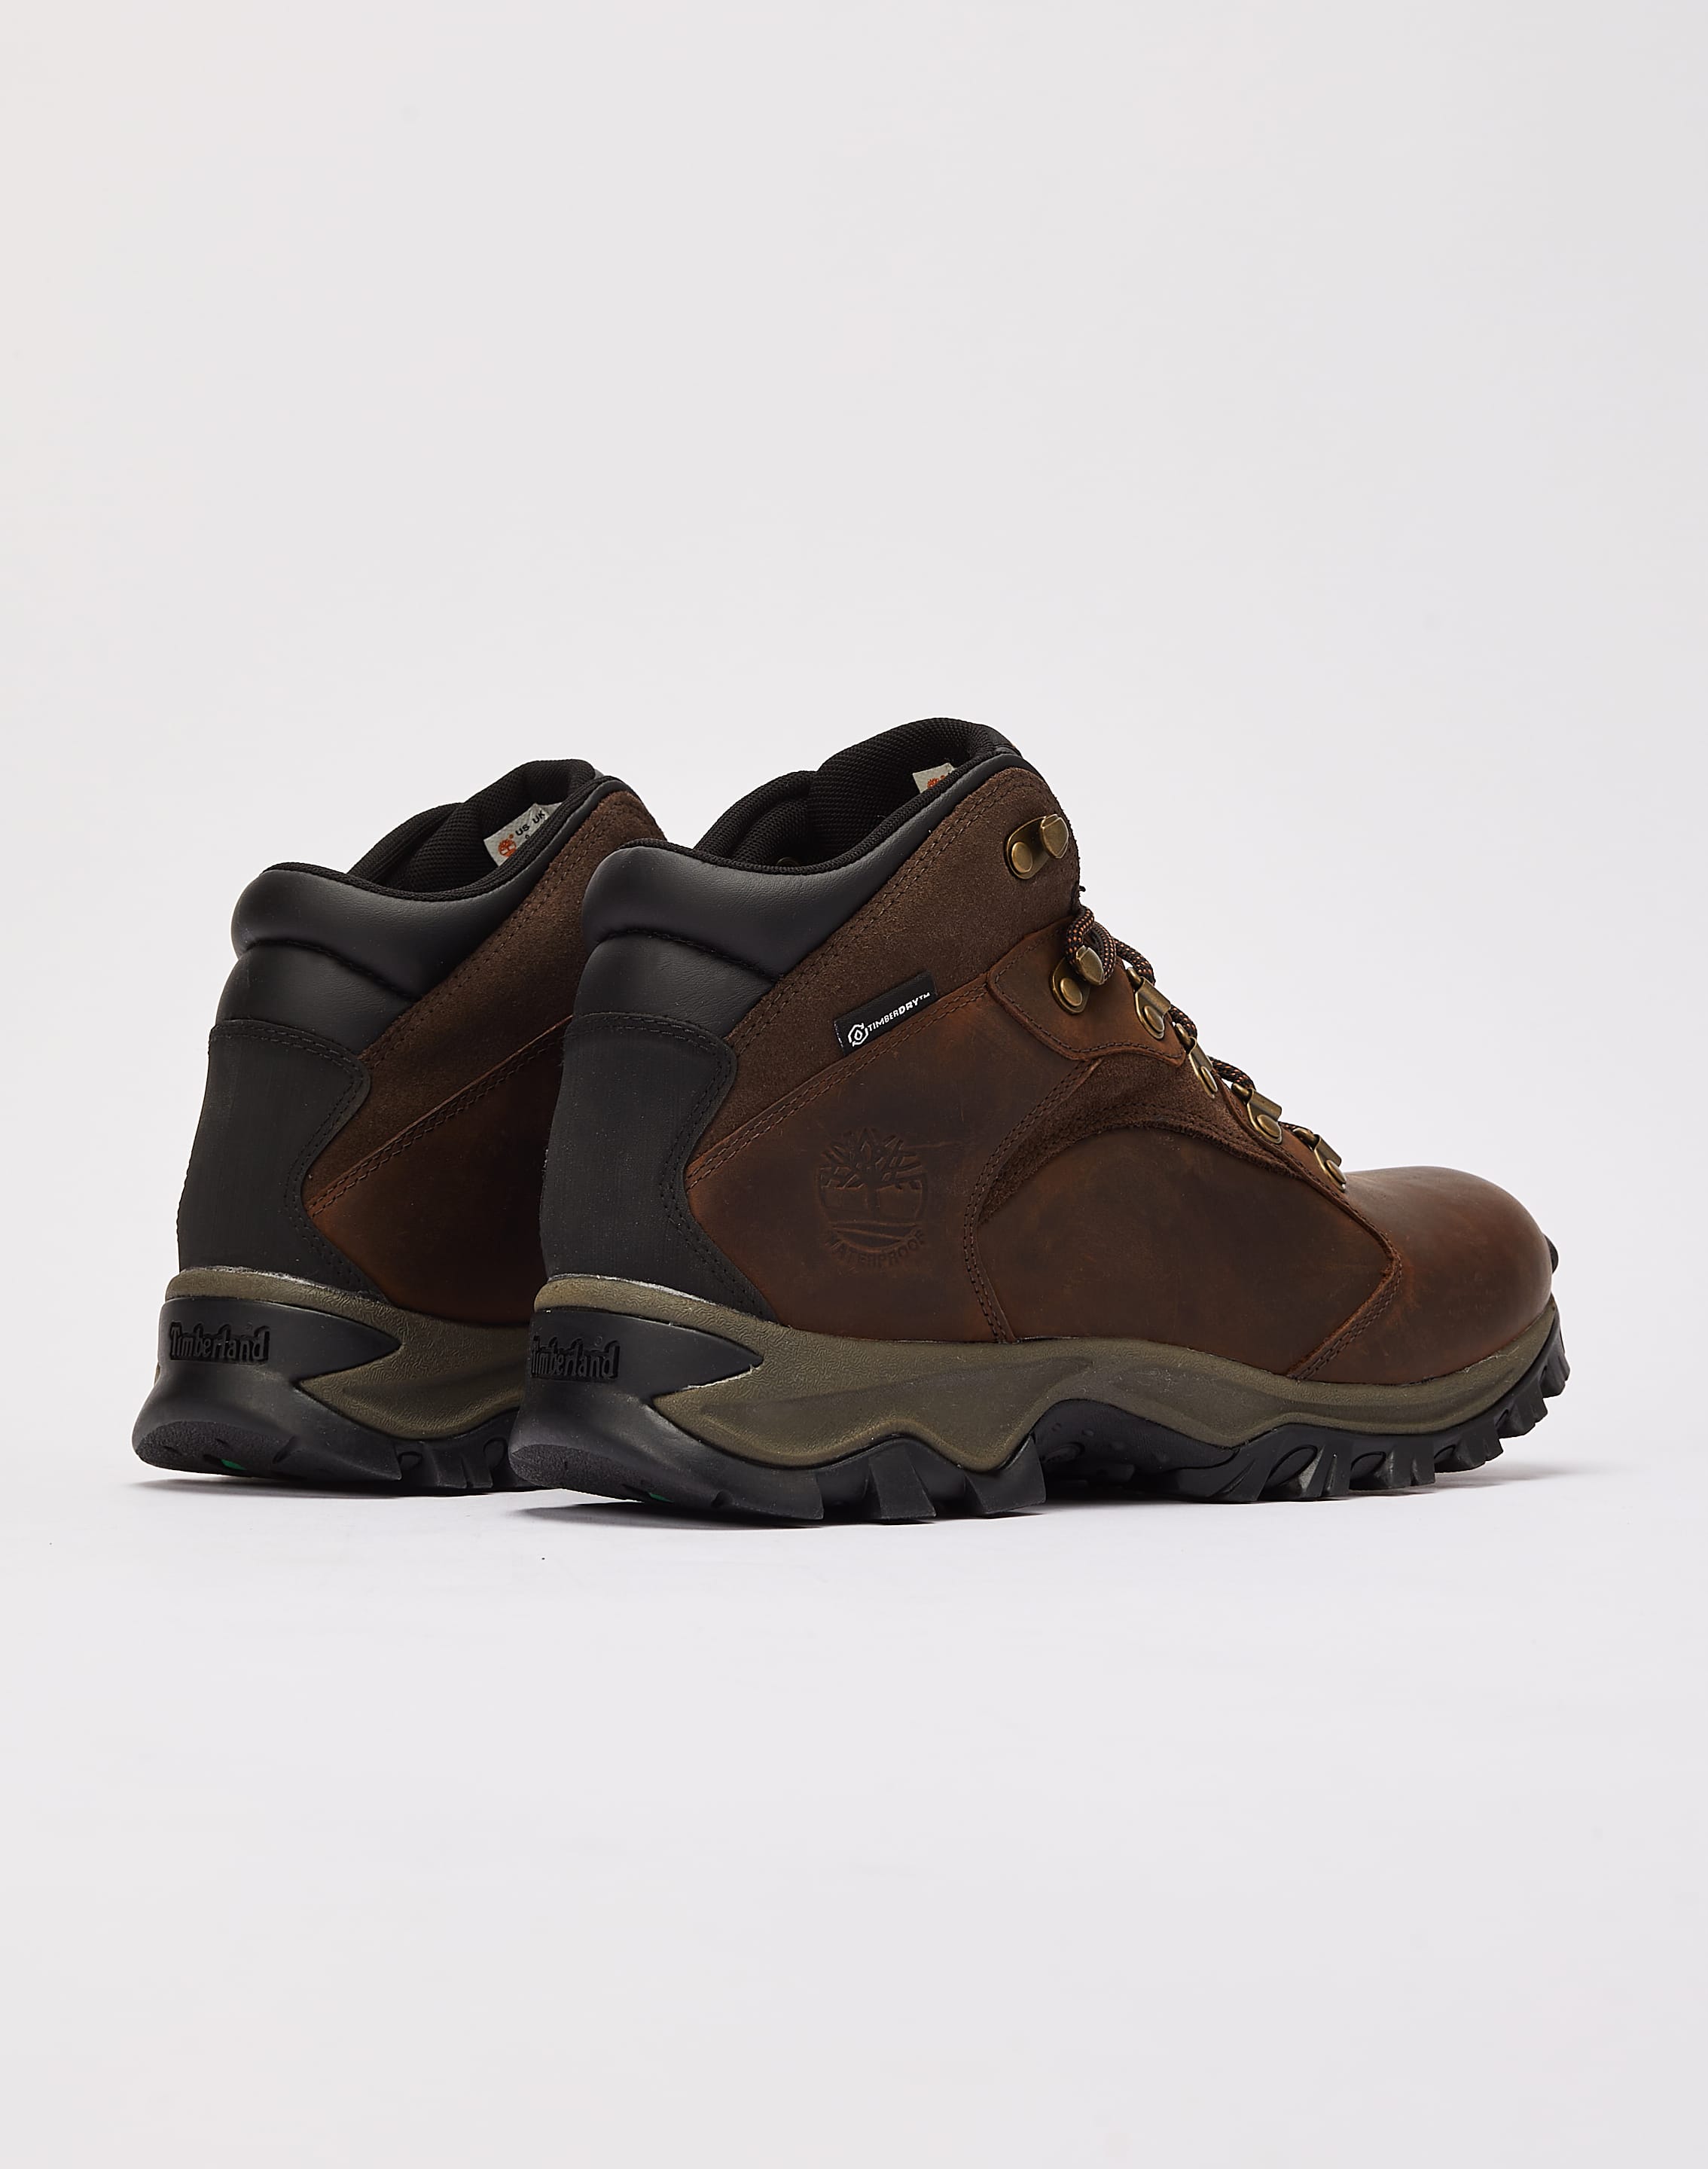 Rockrimmon Boots DTLR Timberland – Hiking